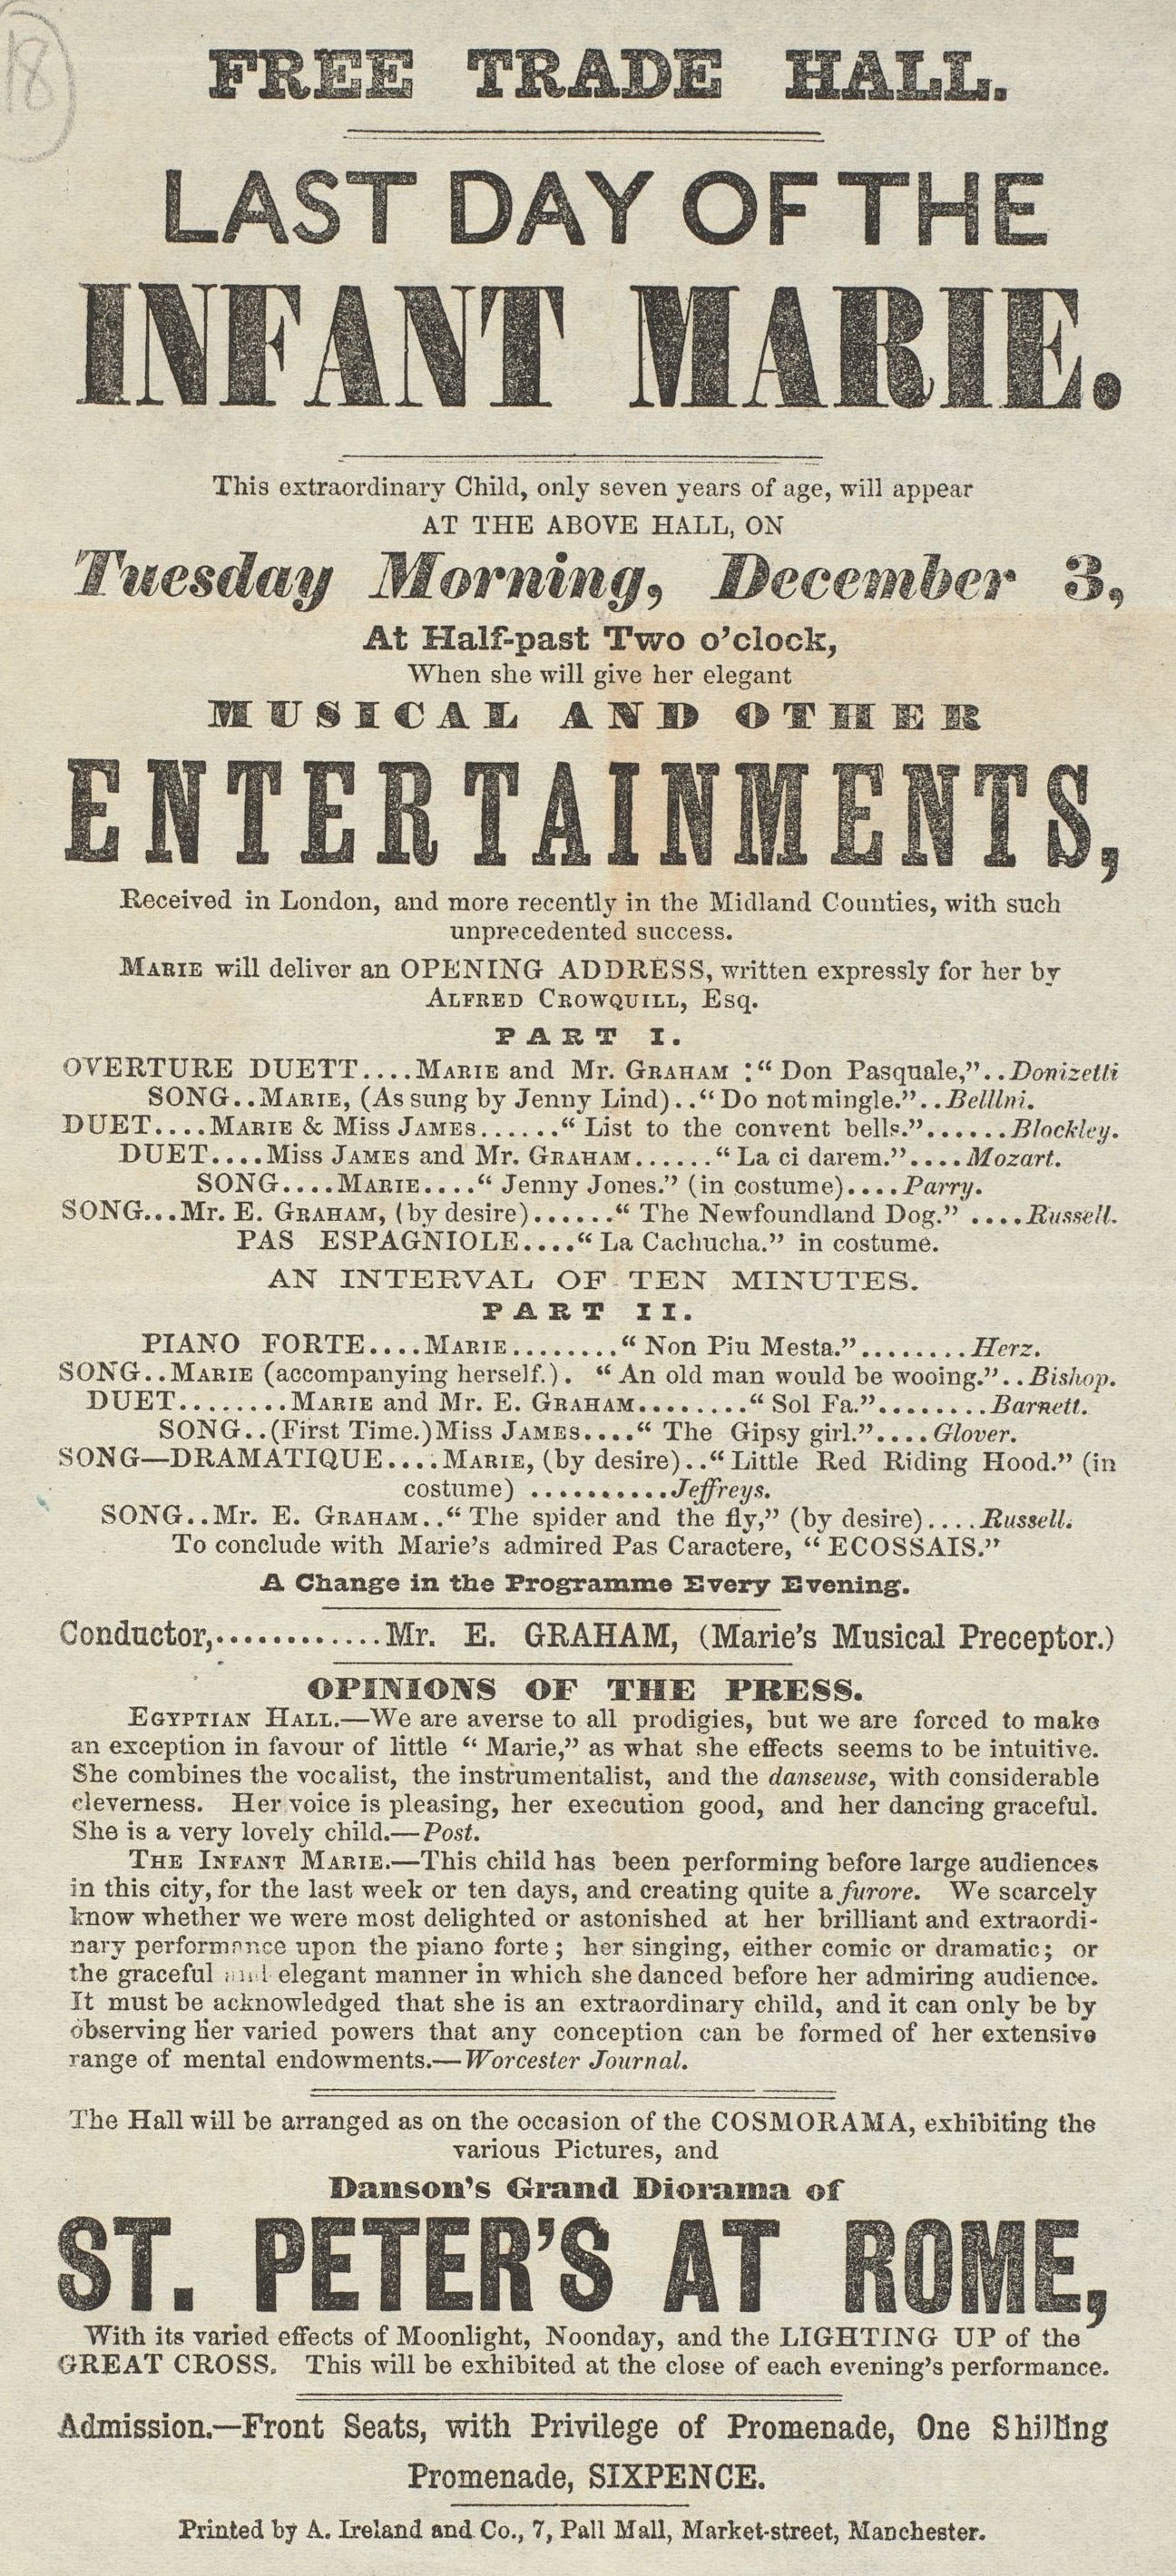 Handbill in a variety of fonts, uppercase, lowercase and bold, giving programme details, admission prices and press opinions.